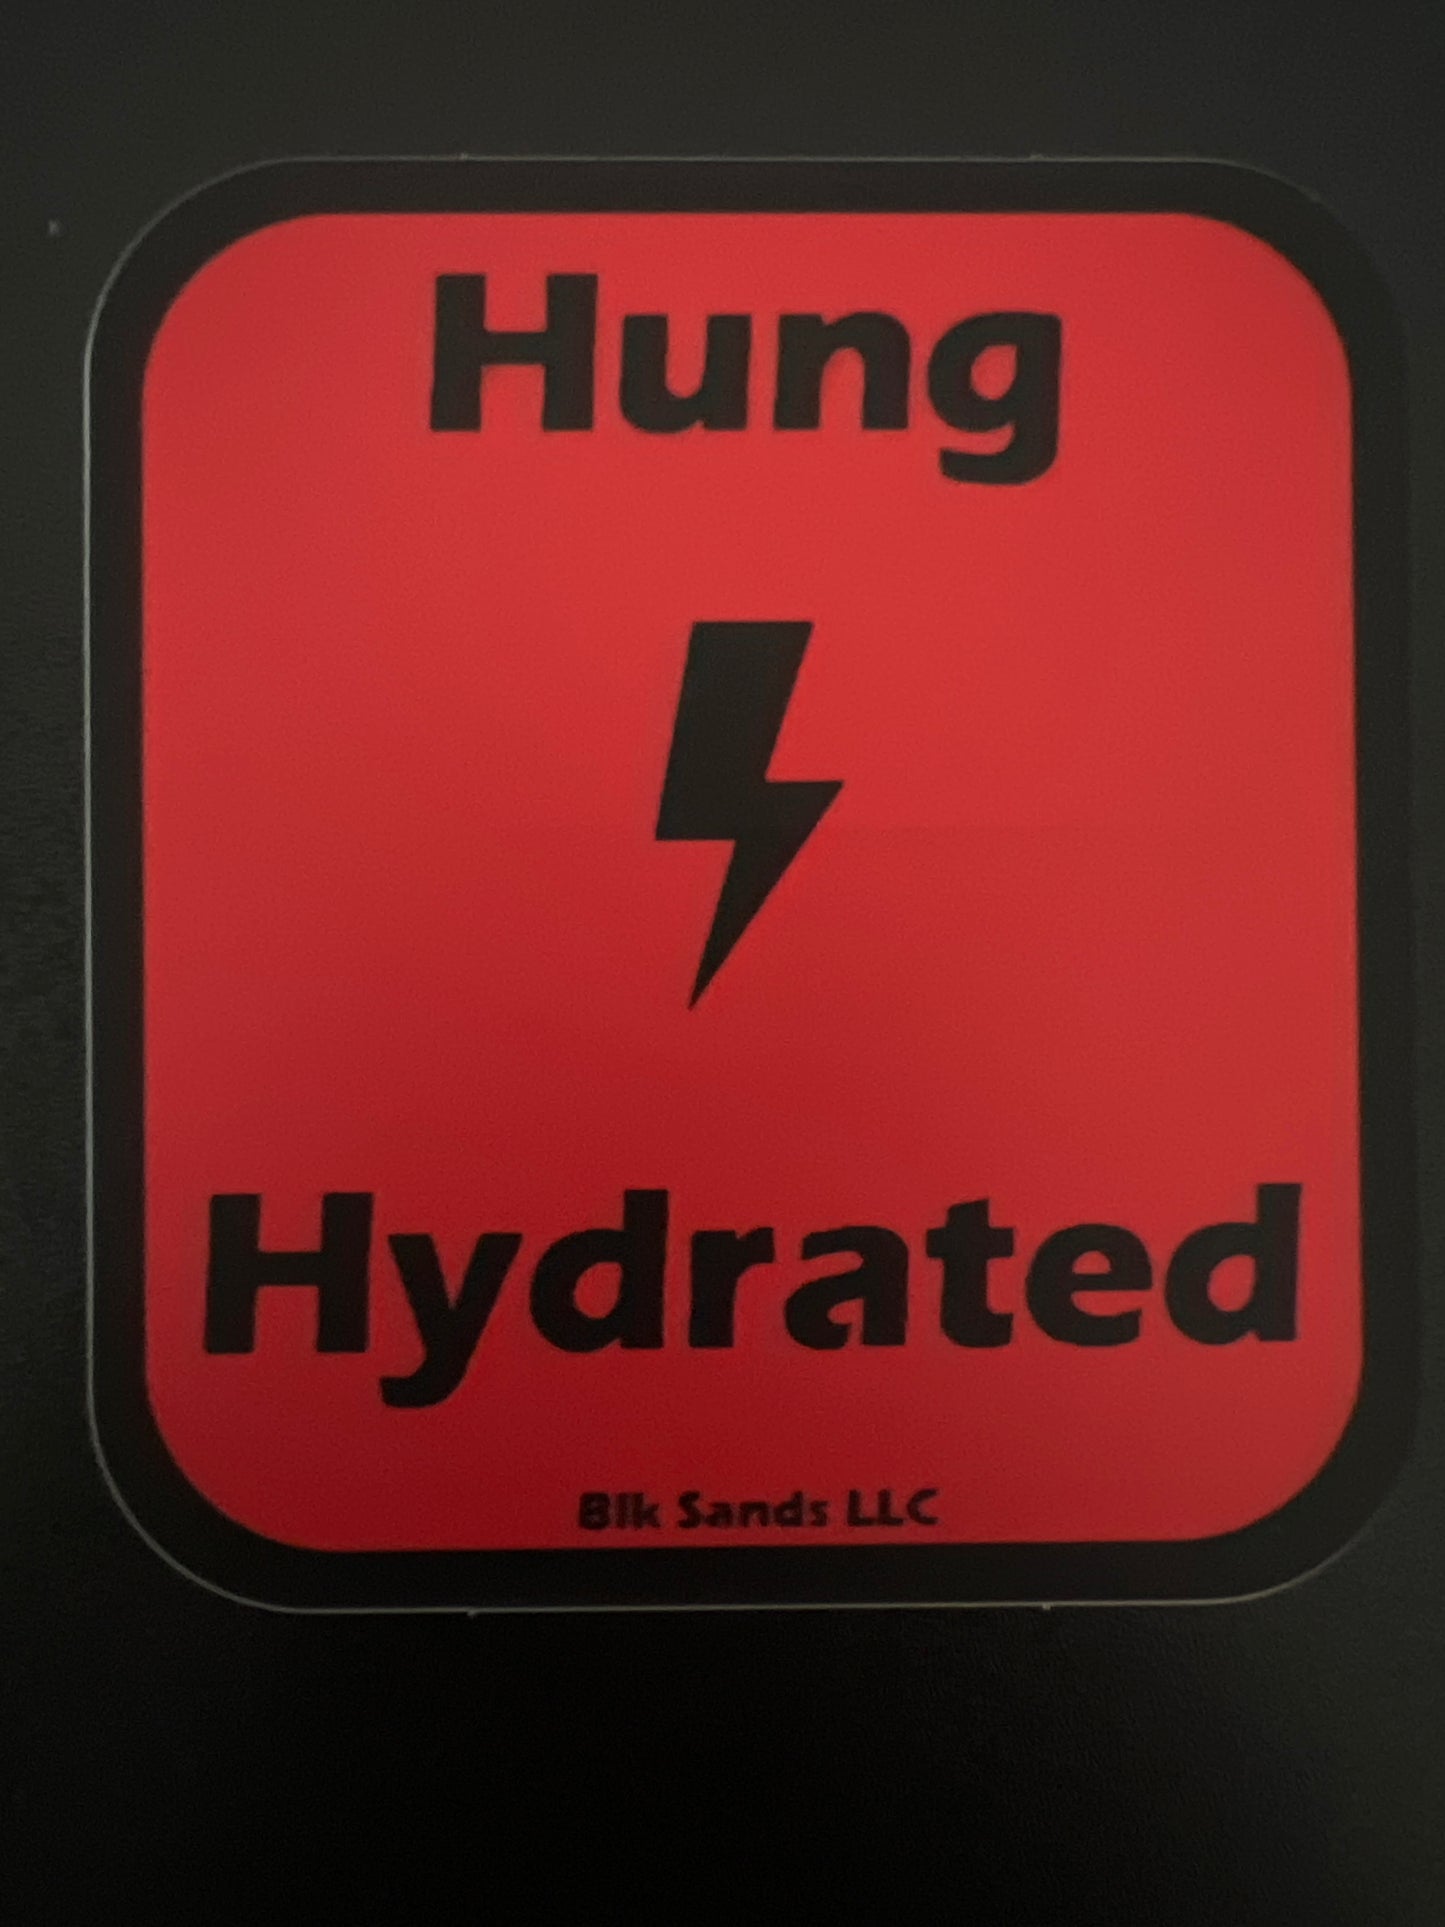 3x3” Hung and Hydrated Sticker